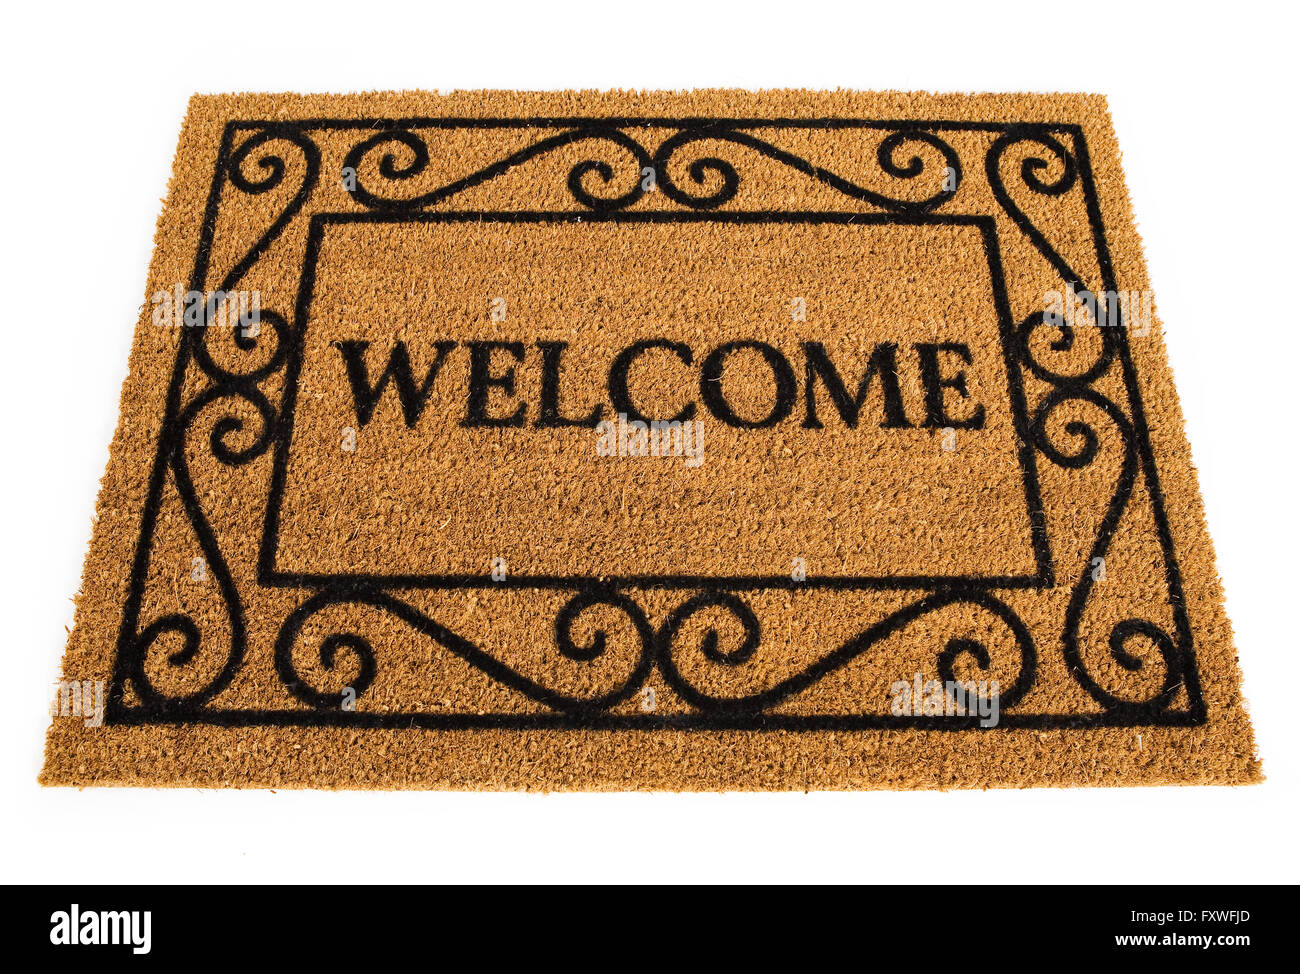 Isolated on white door mat with various messages. Stock Photo